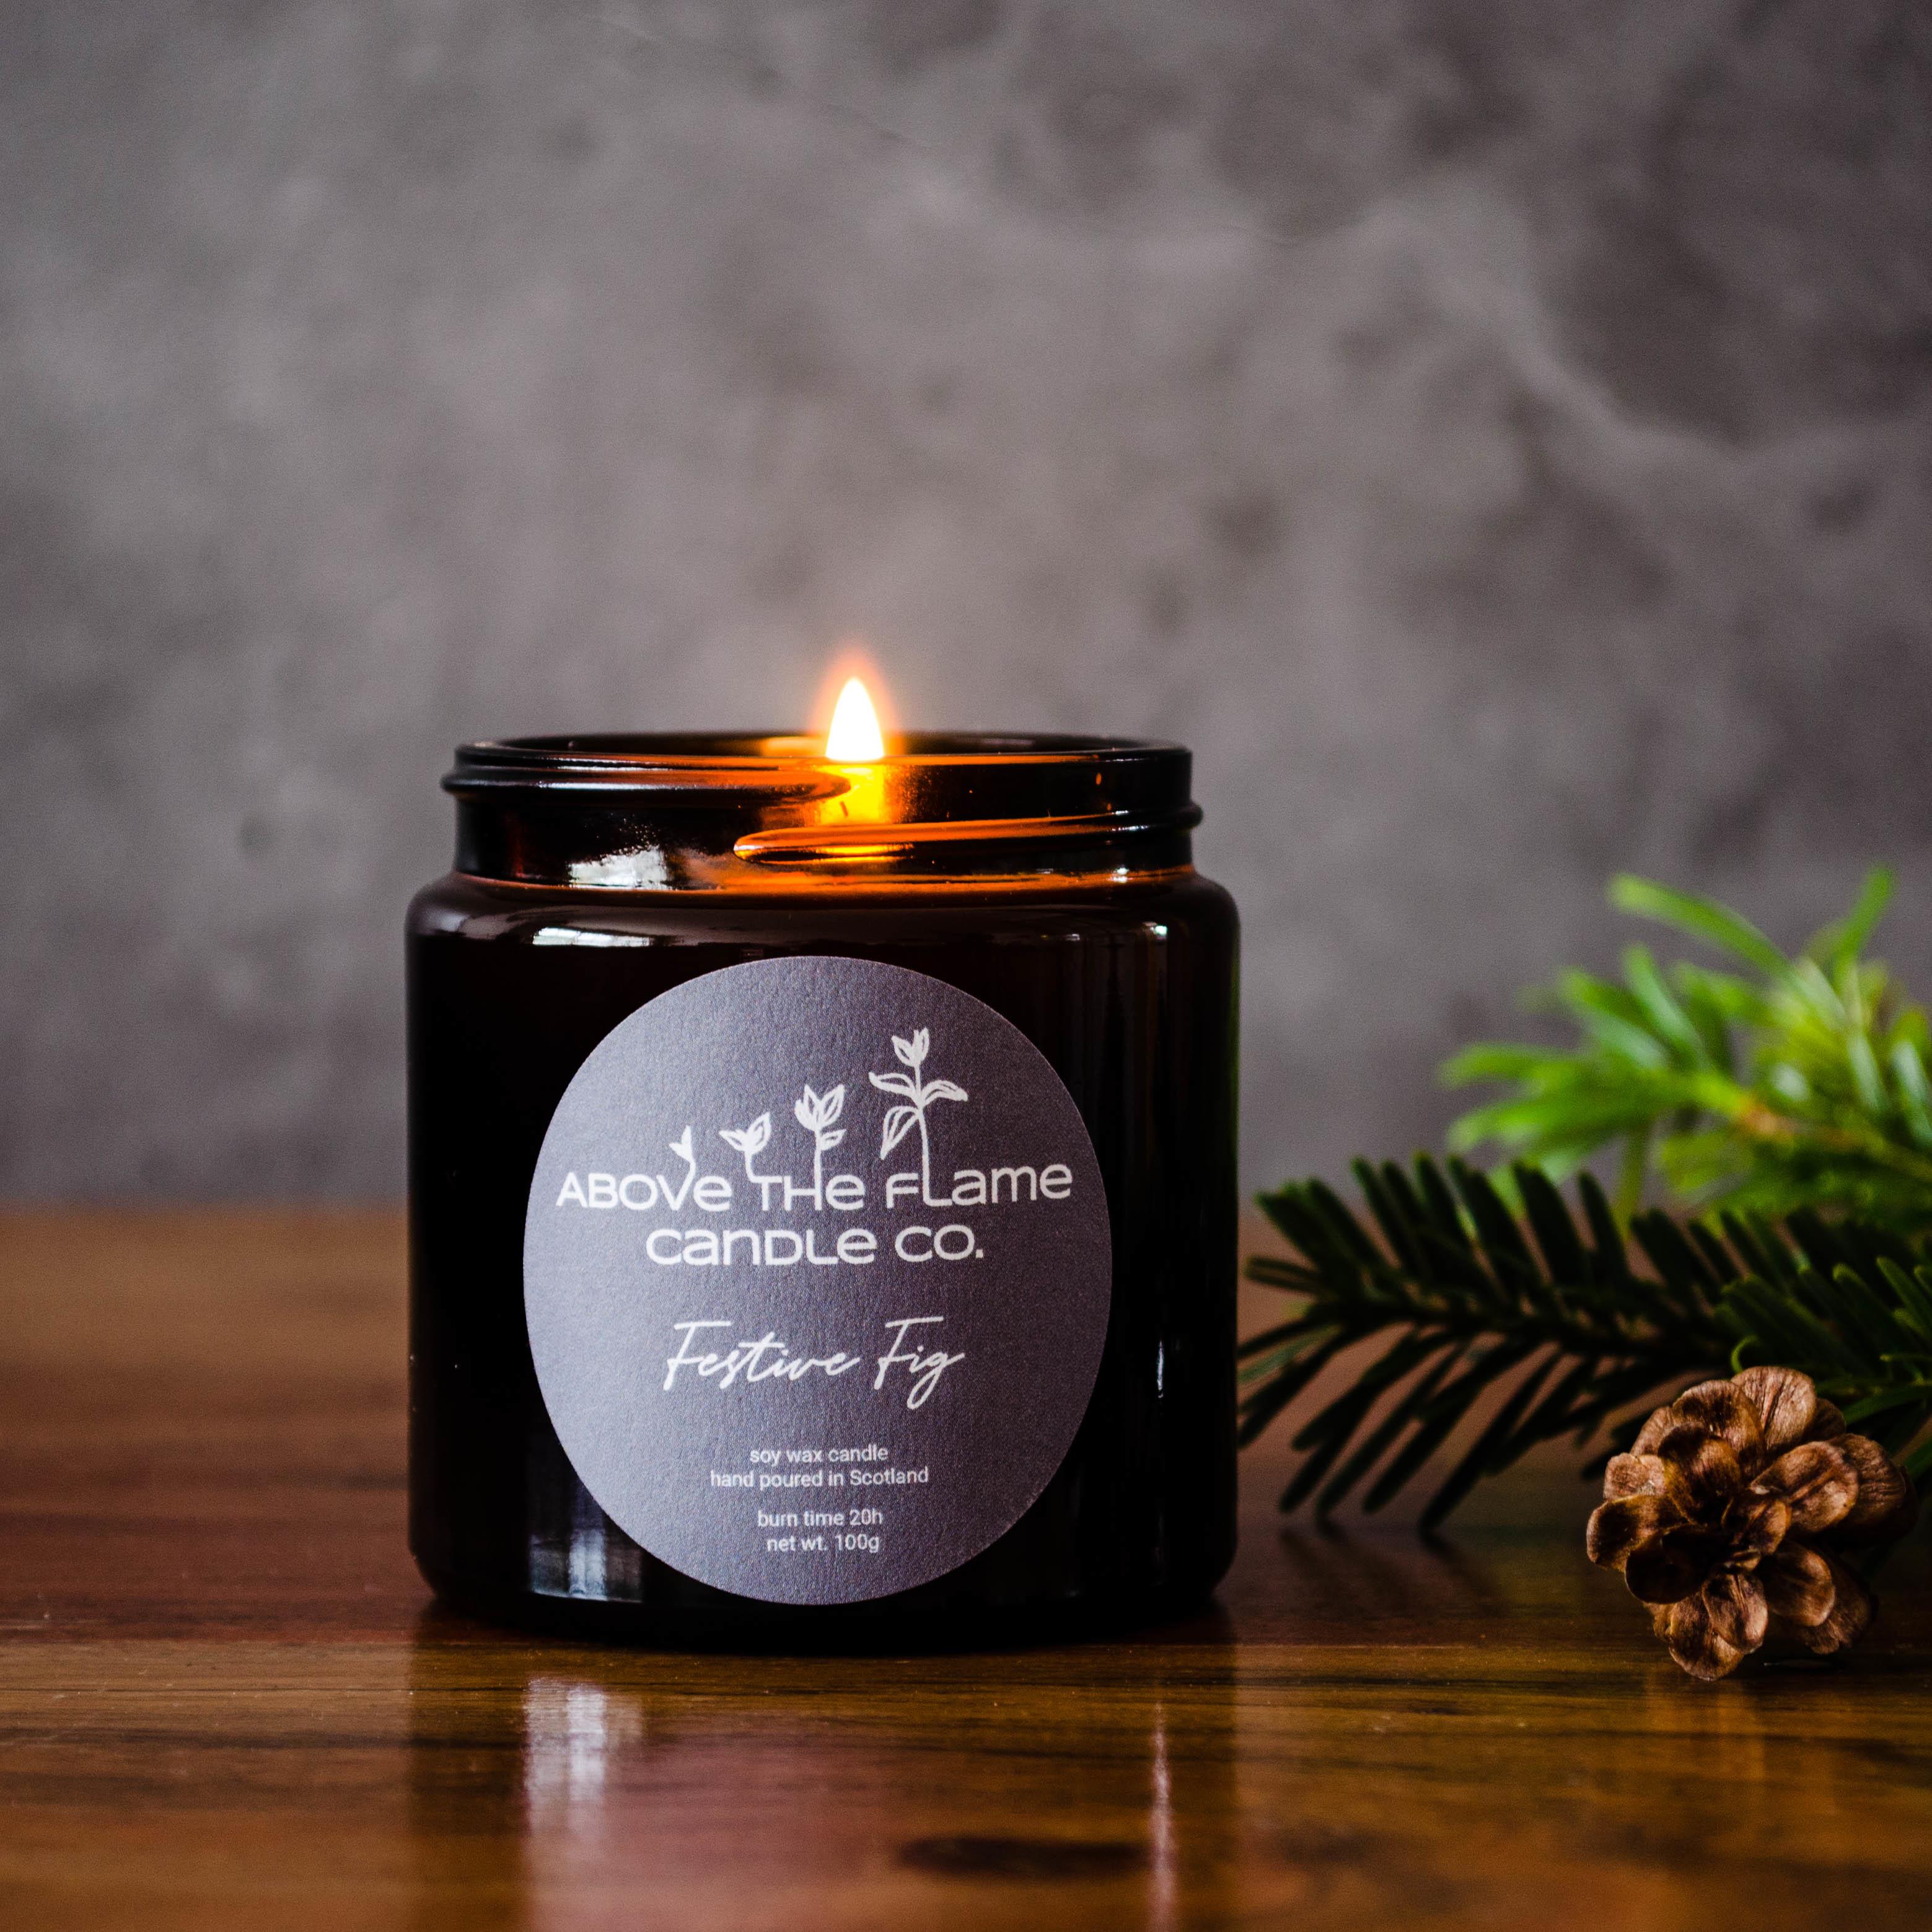 A lit festive fig amber soy wax candle jar handmade by above the flame candle Co on a wooden table